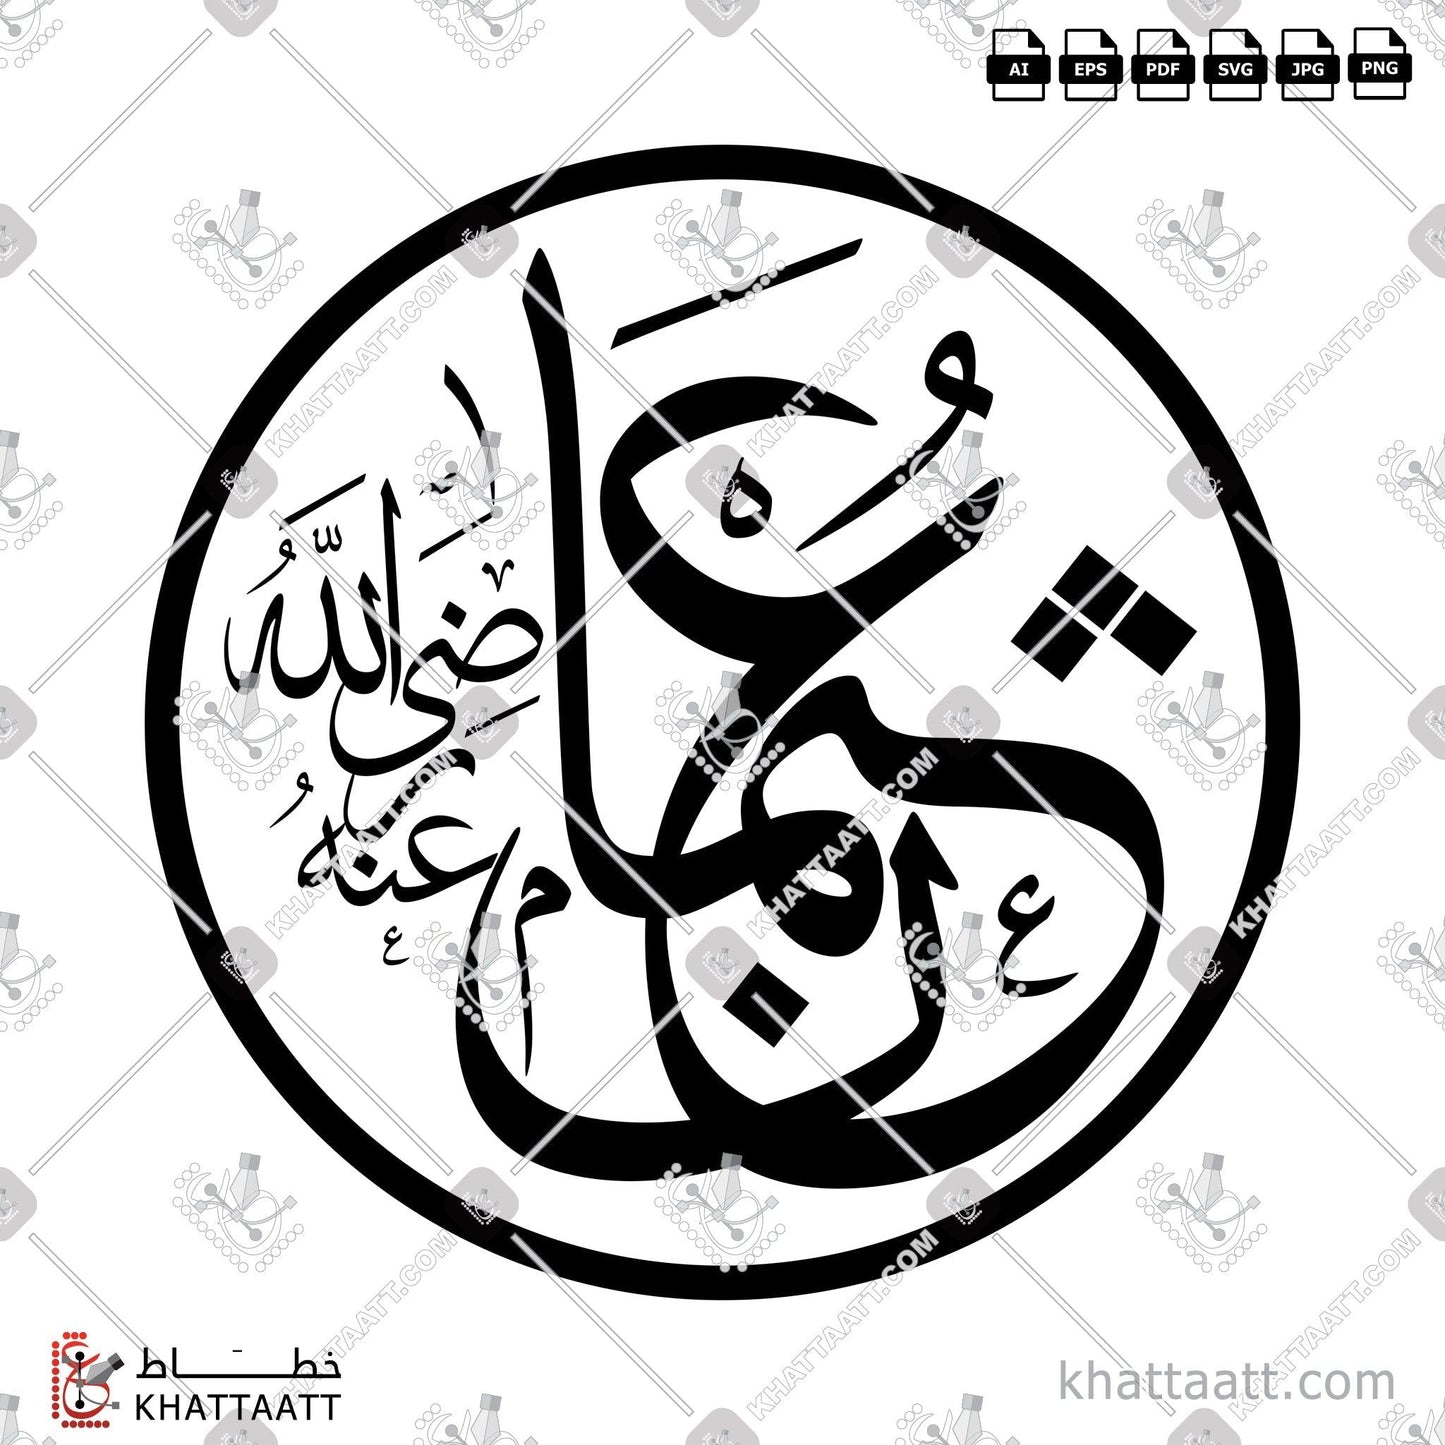 Download Arabic Calligraphy of Uthman ibn Affan - عثمان بن عفان in Thuluth - خط الثلث in vector and .png